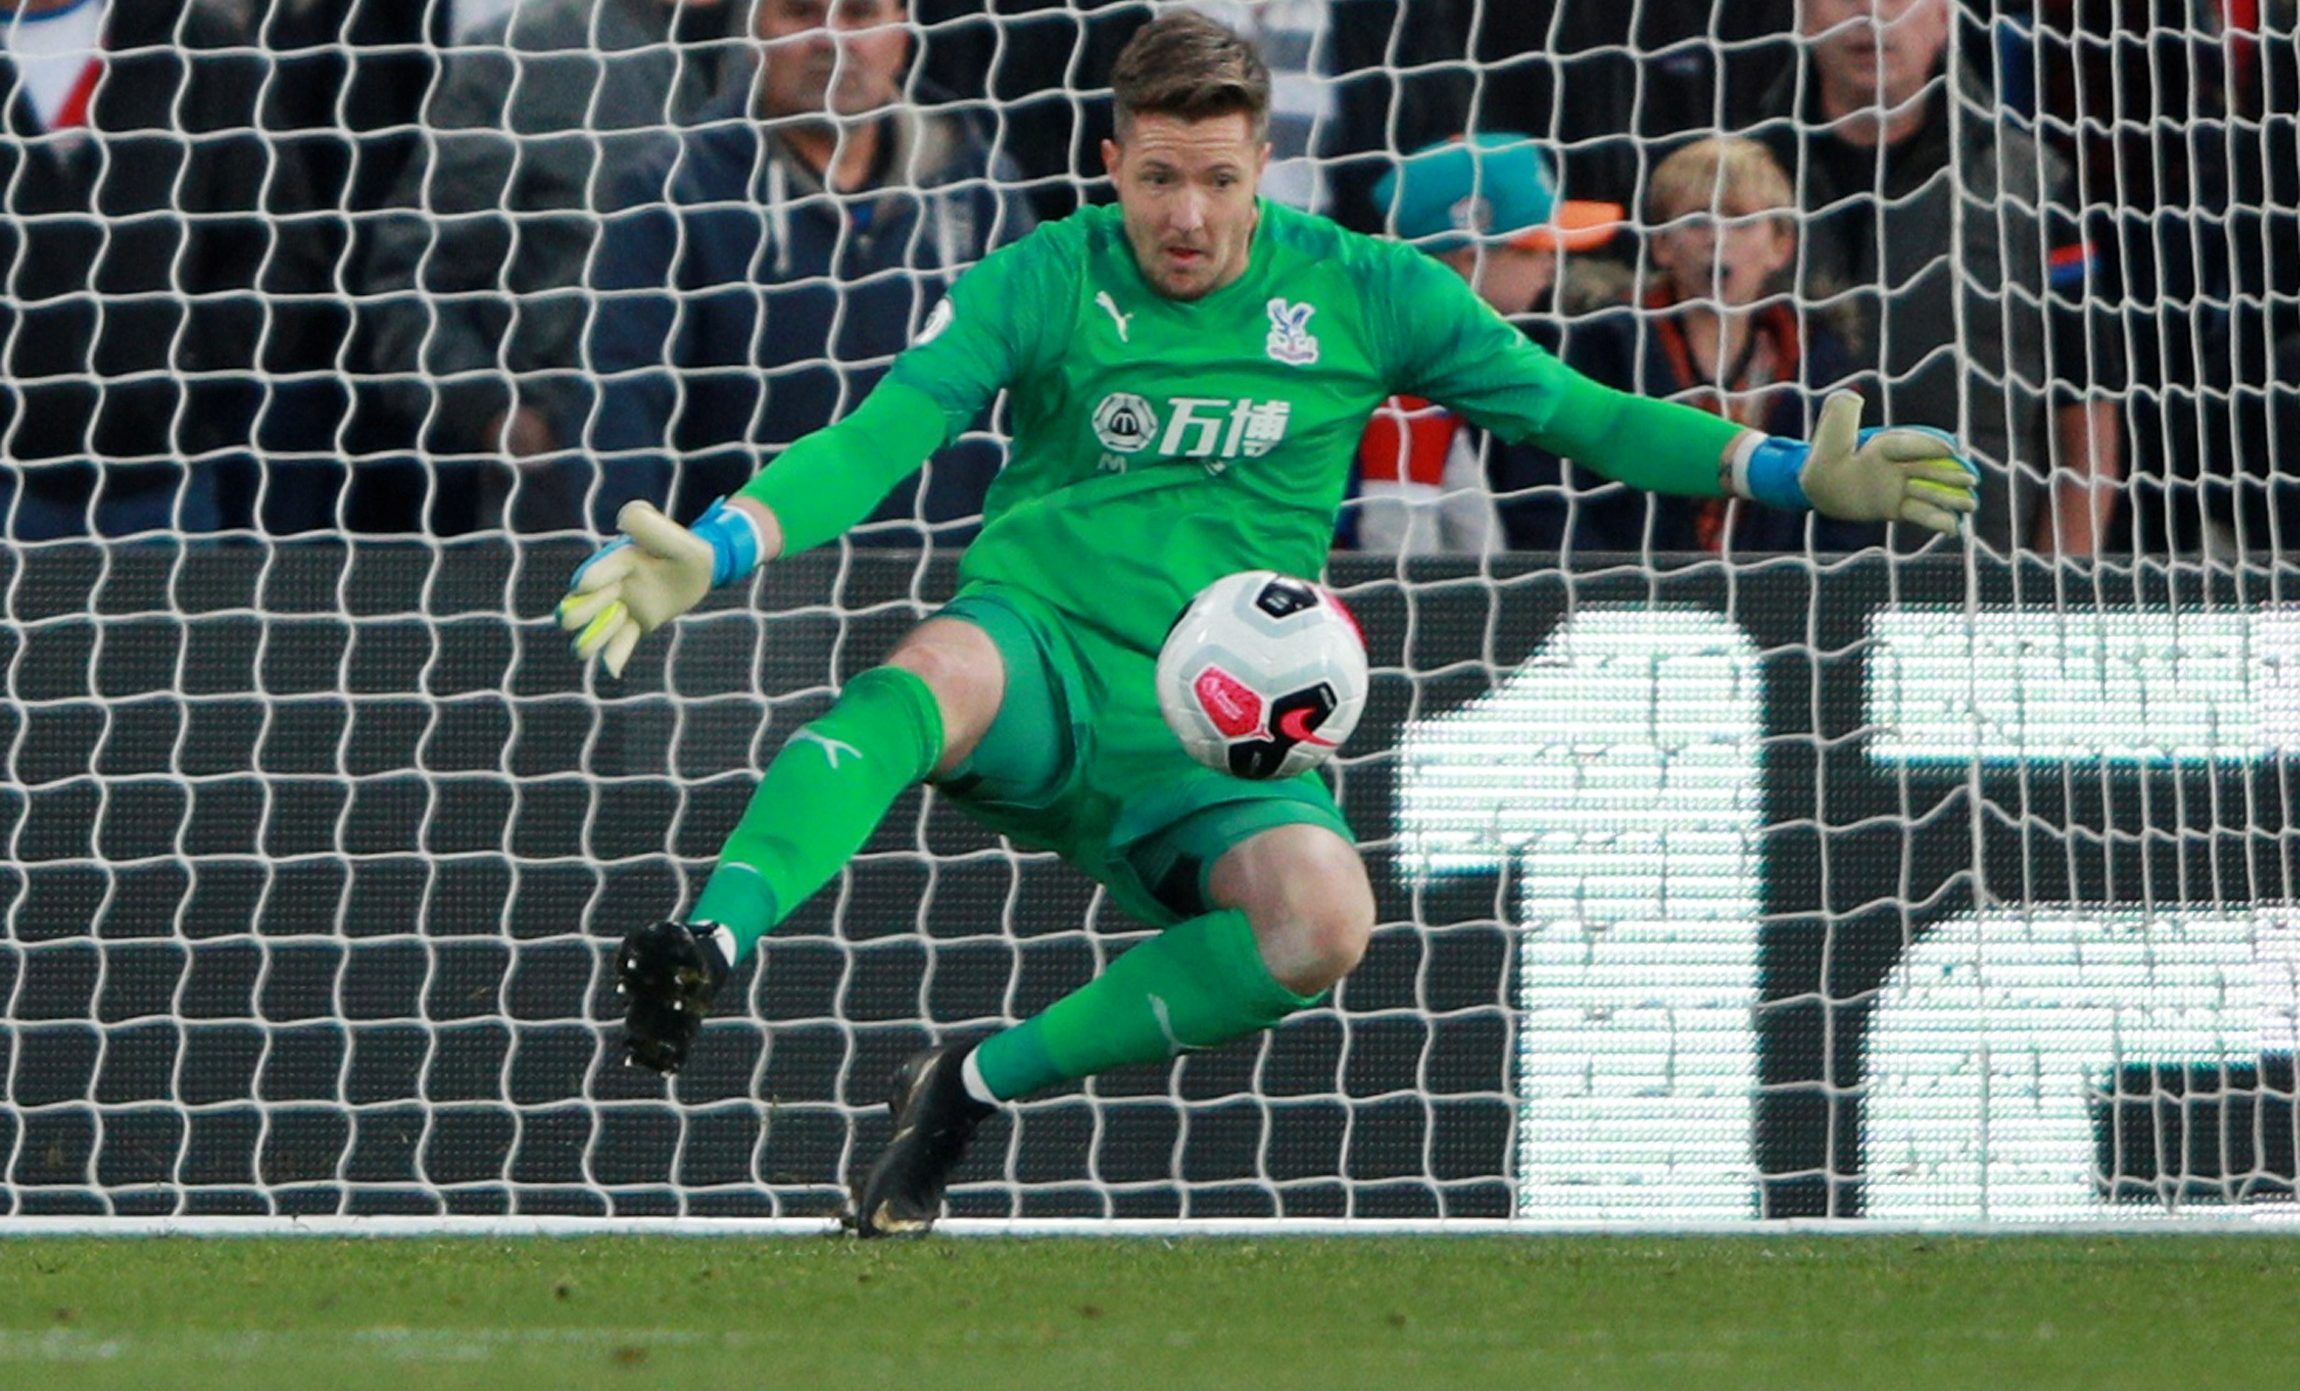 Soccer Football - Premier League - Crystal Palace v Manchester City - Selhurst Park, London, Britain - October 19, 2019  Crystal Palace's Wayne Hennessey in action        REUTERS/Ian Walton  EDITORIAL USE ONLY. No use with unauthorized audio, video, data, fixture lists, club/league logos or 